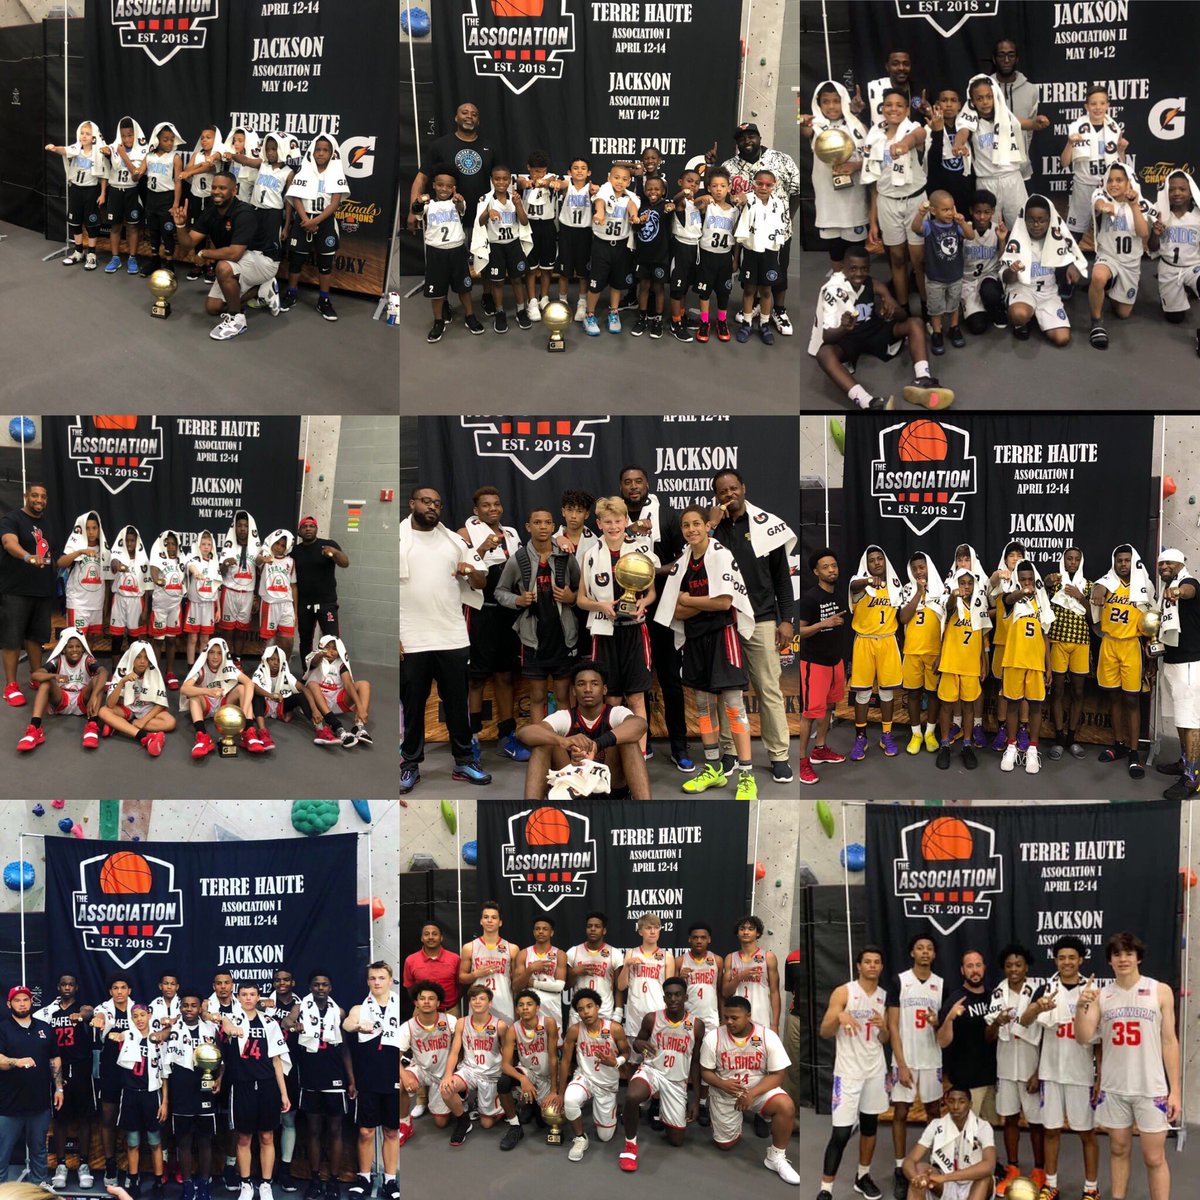 Congrats to all the winners this weekend! Talent was top level everything was earned! 💍💍💍 #TheInvite #Gatorade See you in in 2020!